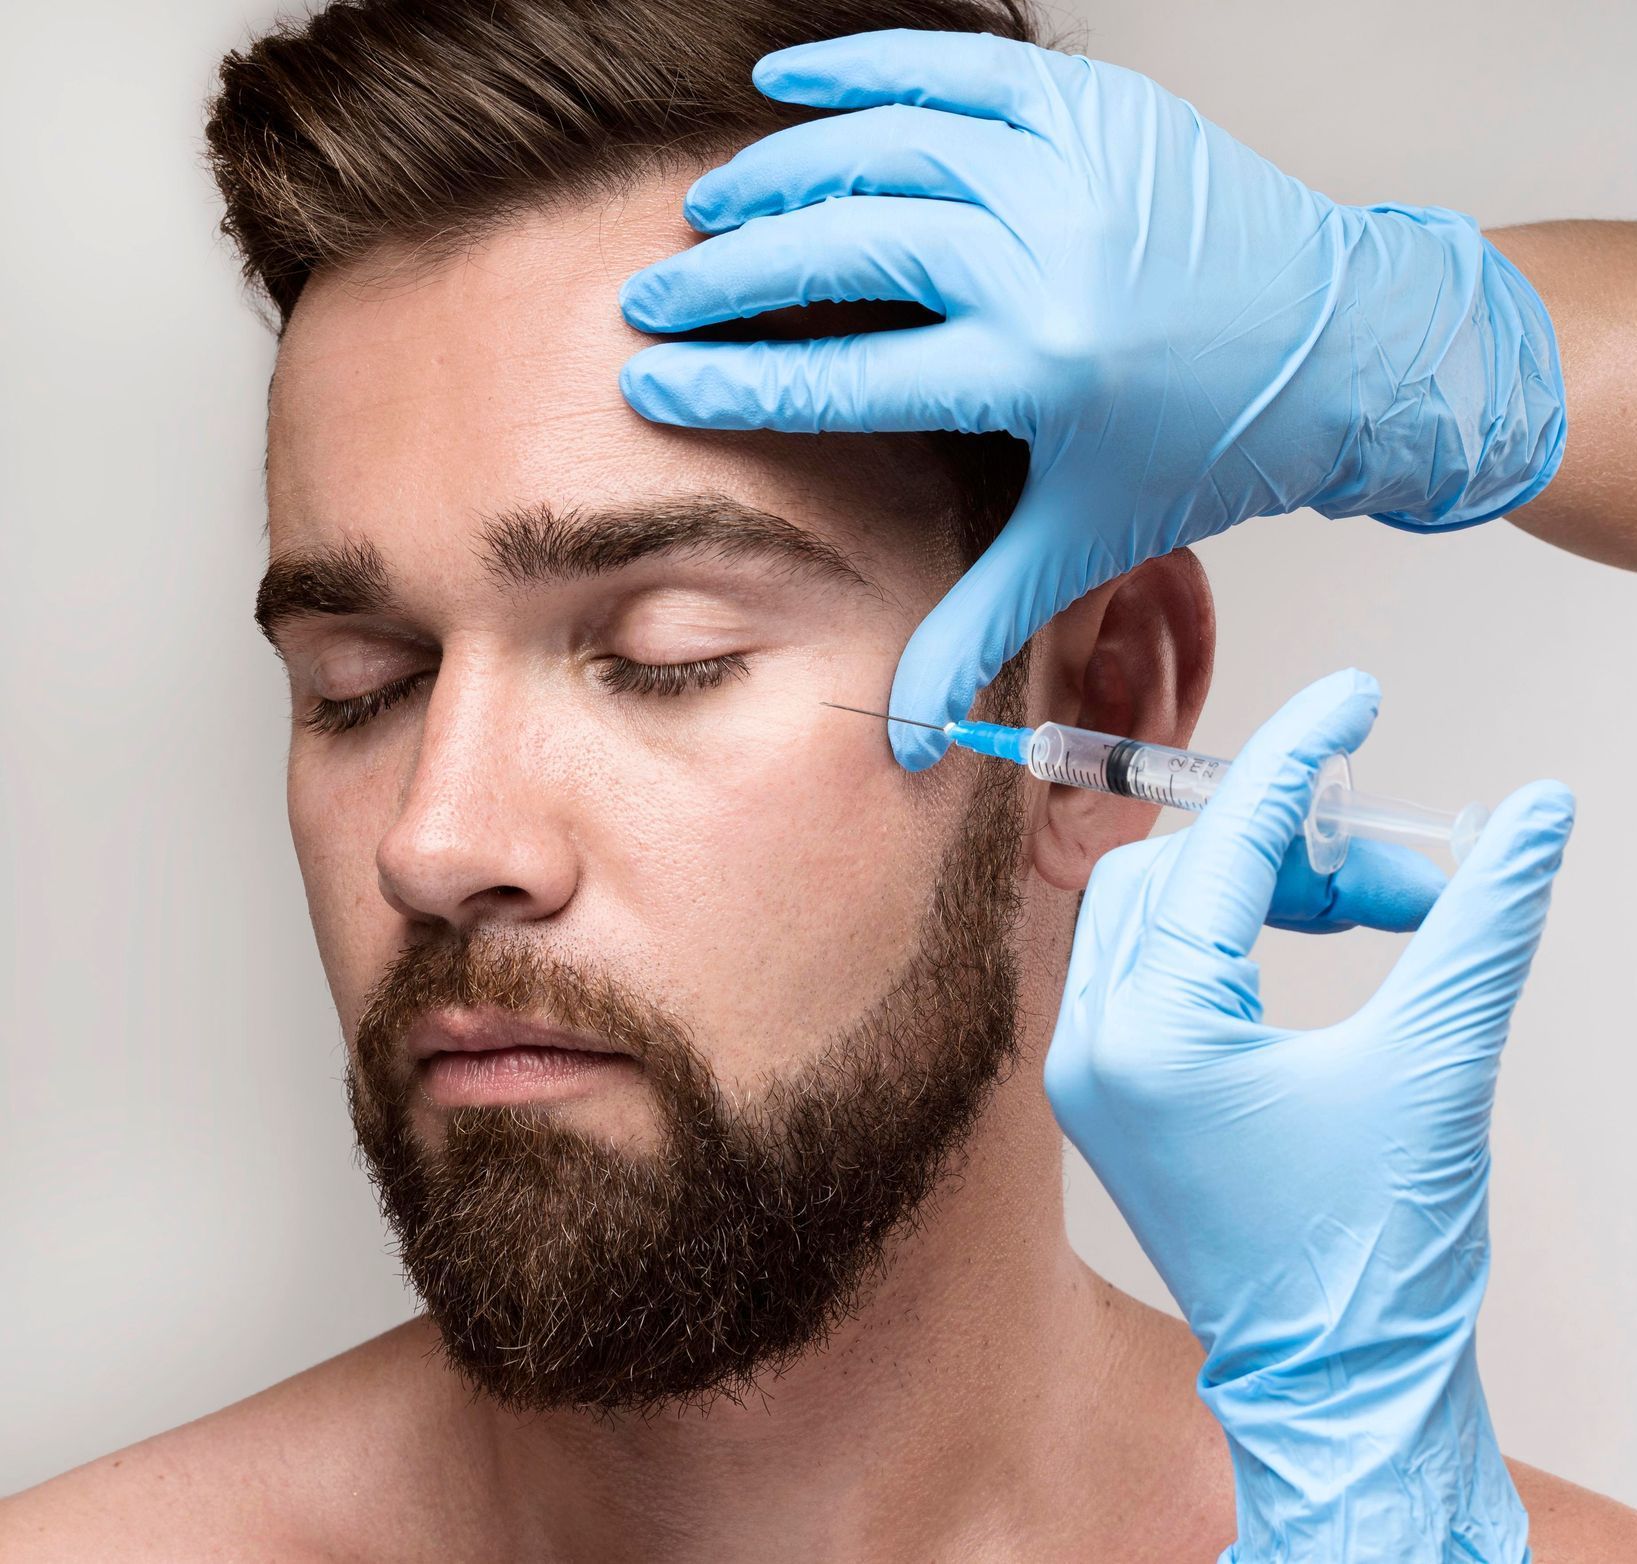 a man with a beard is getting a botox injection in his forehead